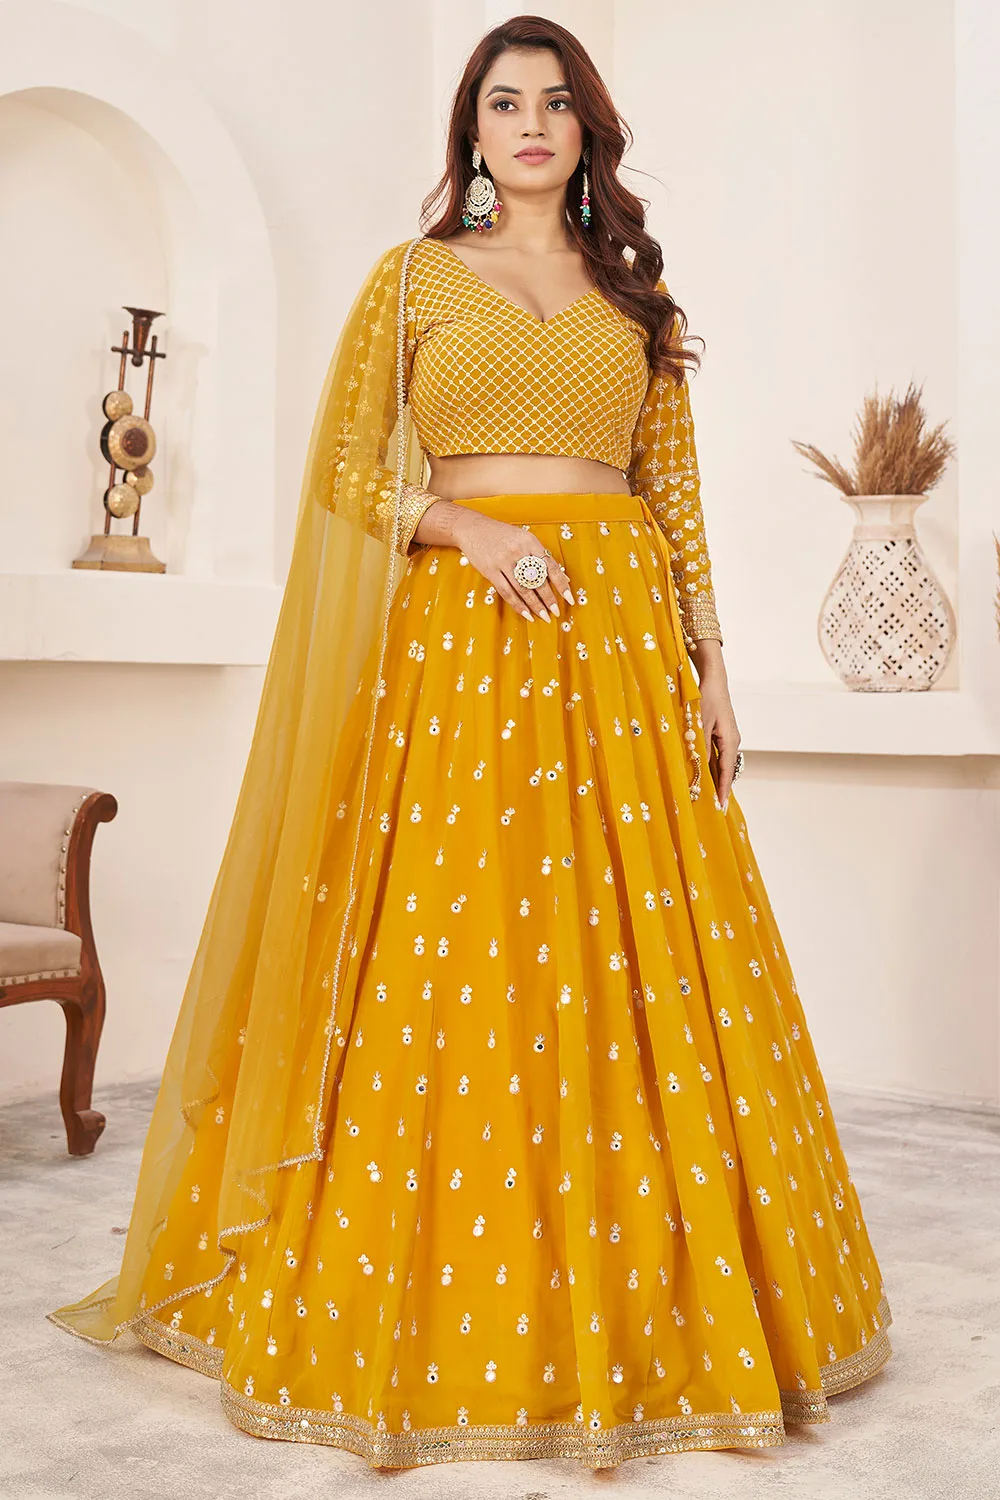 Splendid Yellow Georgette Lehenga Set with Sequins and Multi Colored Thread Zari Embroidery